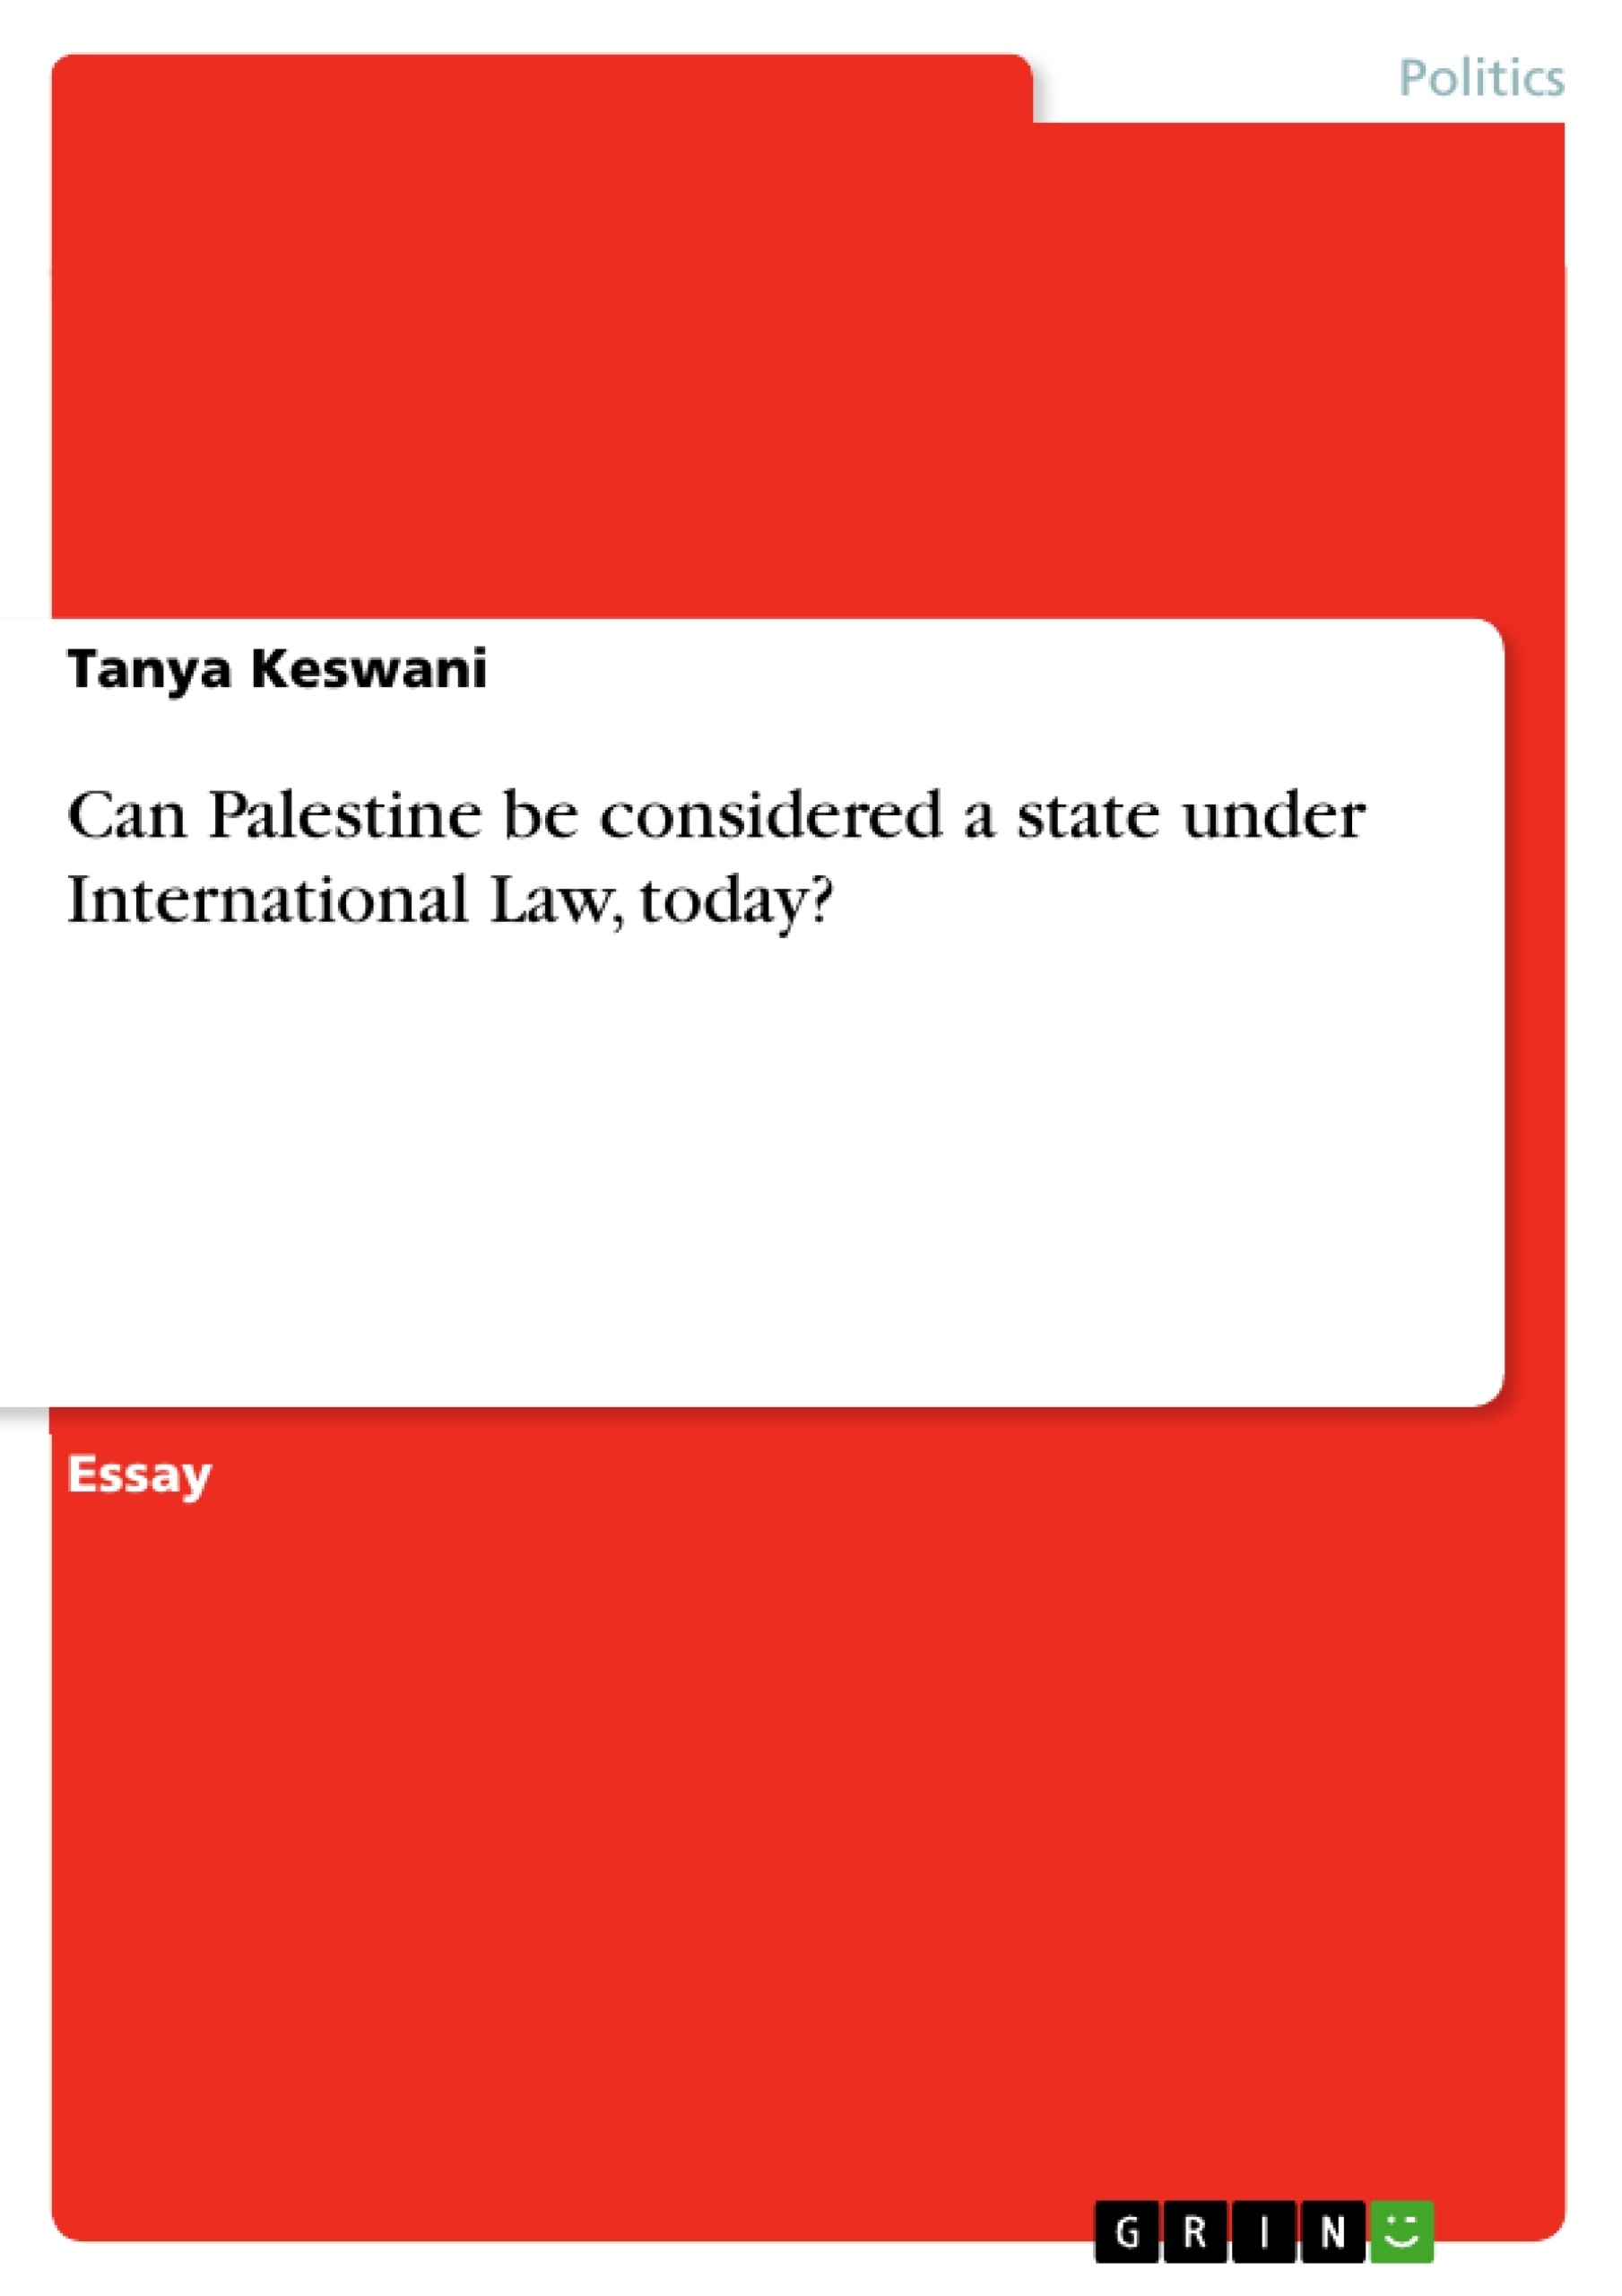 Titre: Can Palestine be considered a state under International Law, today?